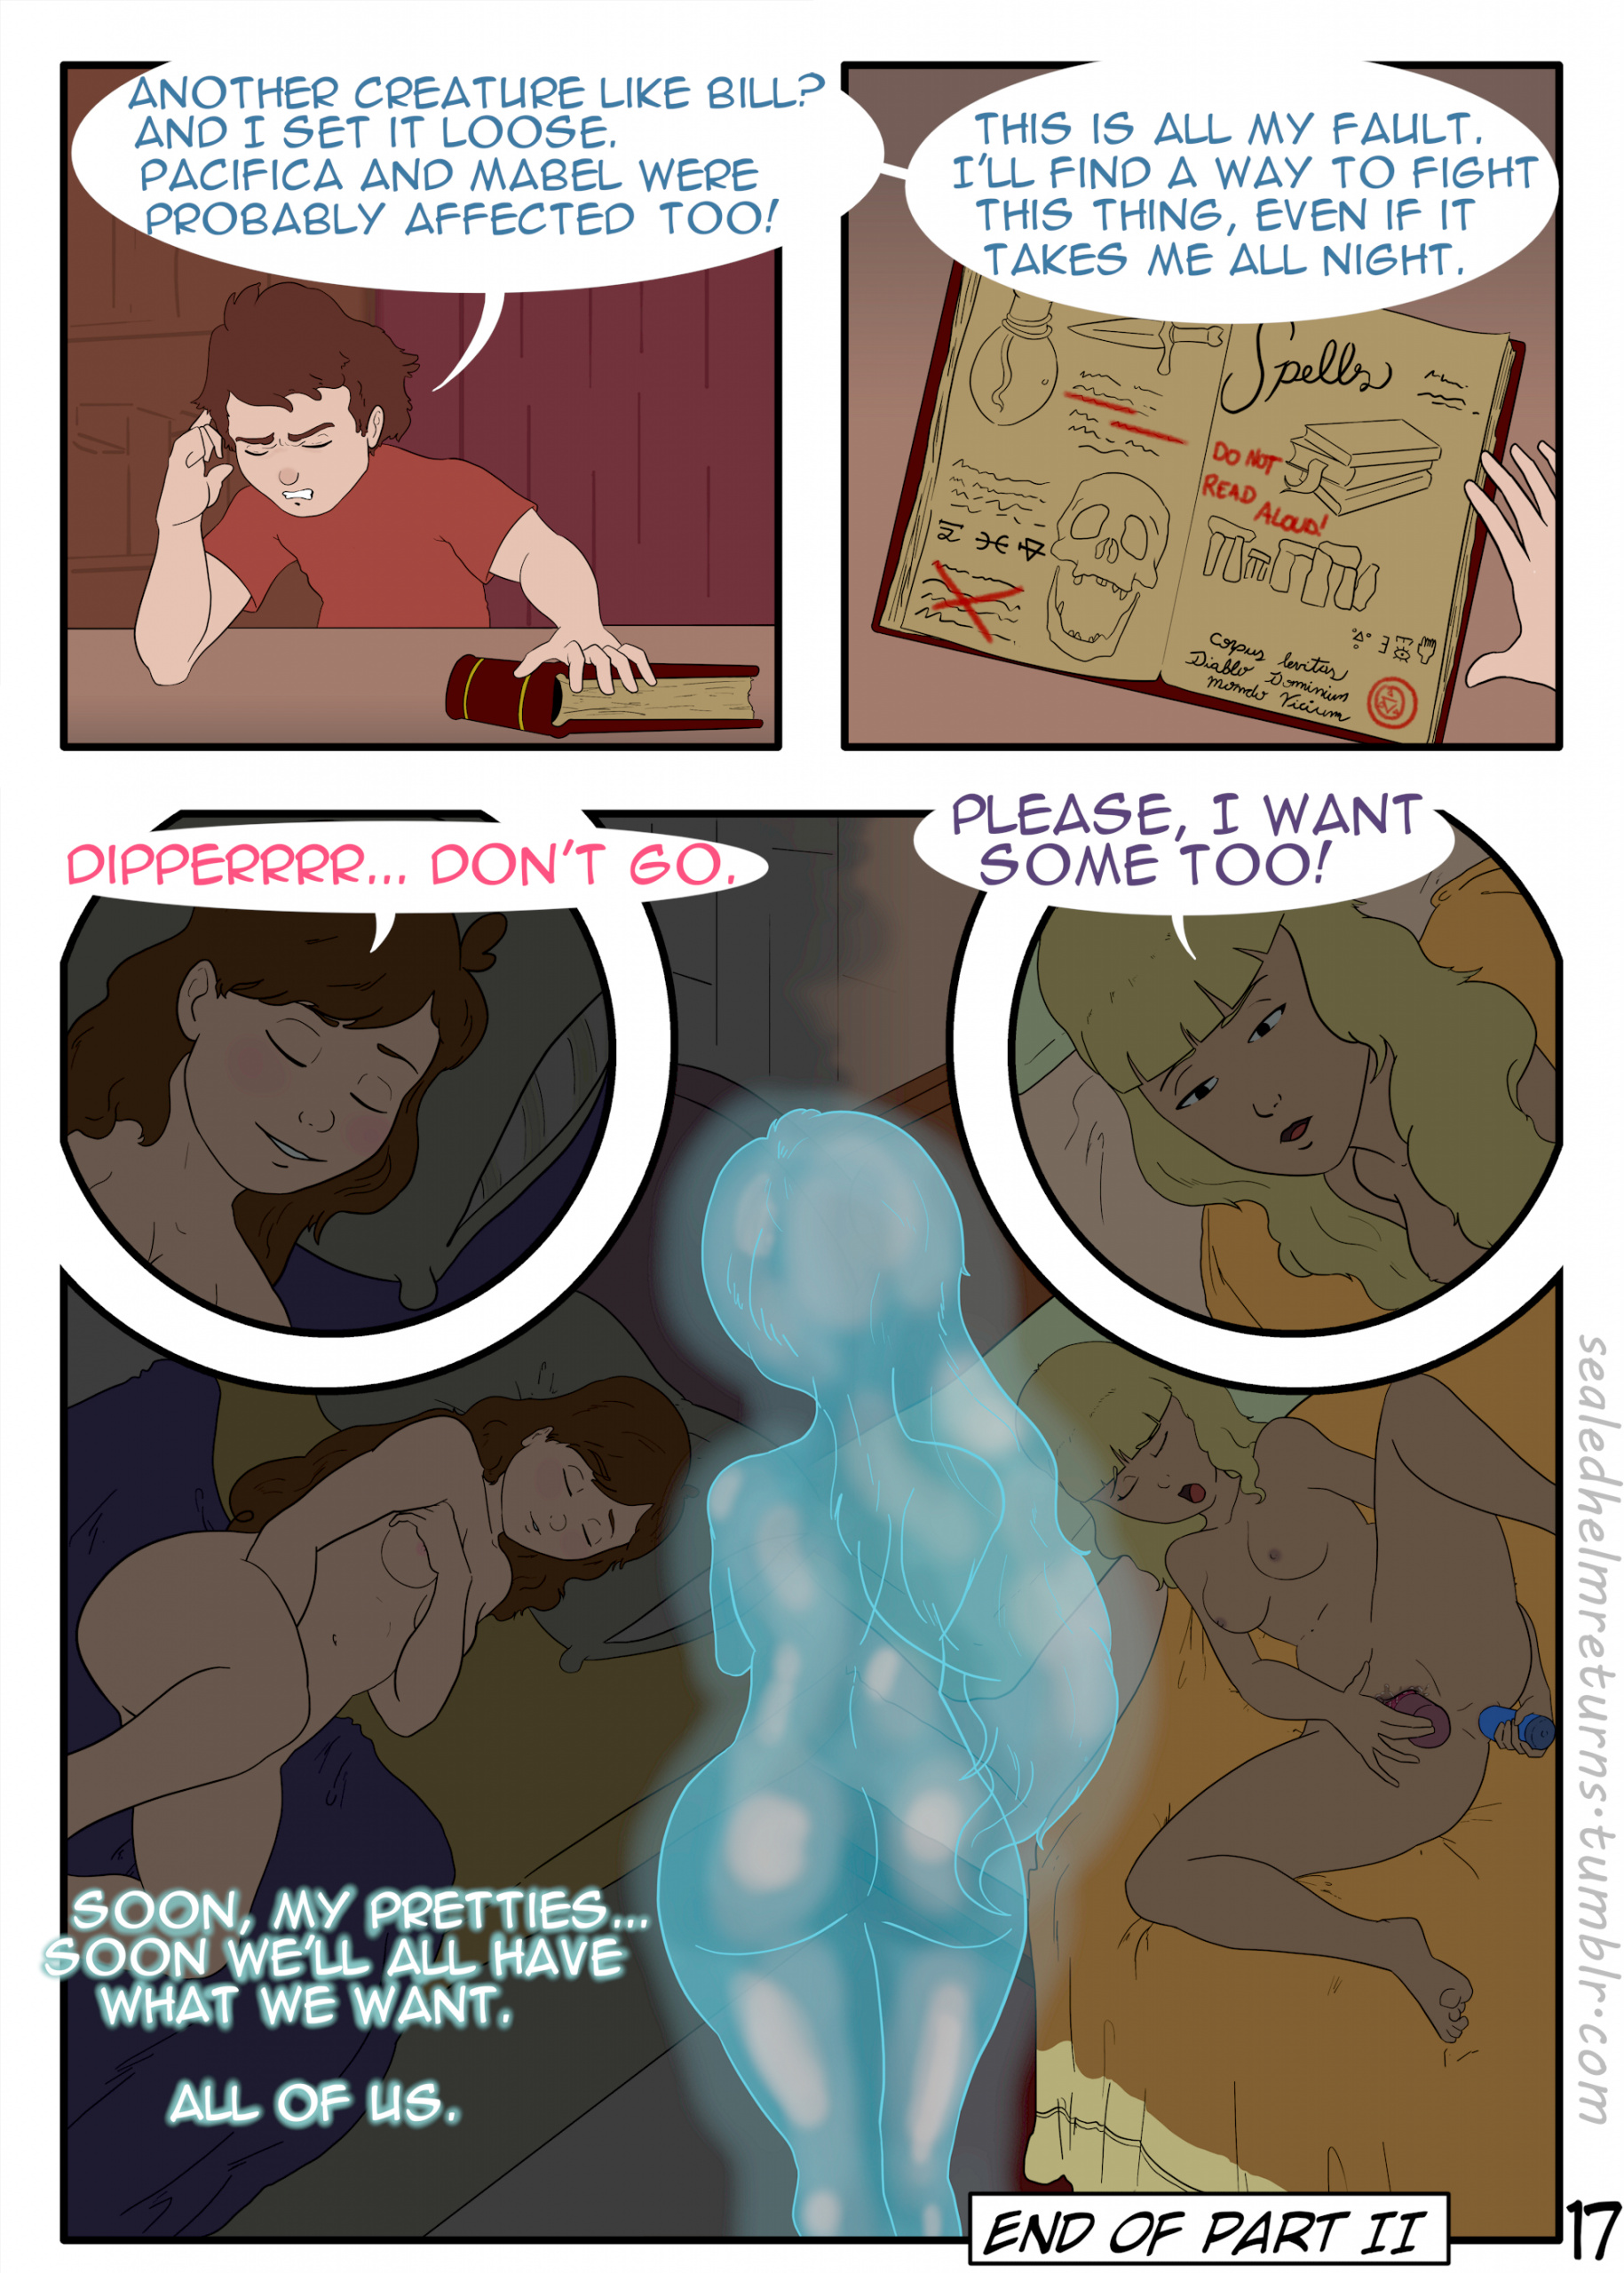 Butterflies in my Head 2 porn comics Oral sex, Blowjob, Cum Swallow, fingering, Group Sex, incest, Lesbians, Lolicon, Masturbation, Sex and Magic, Sex Toys, Straight, Straight Shota, Threesome